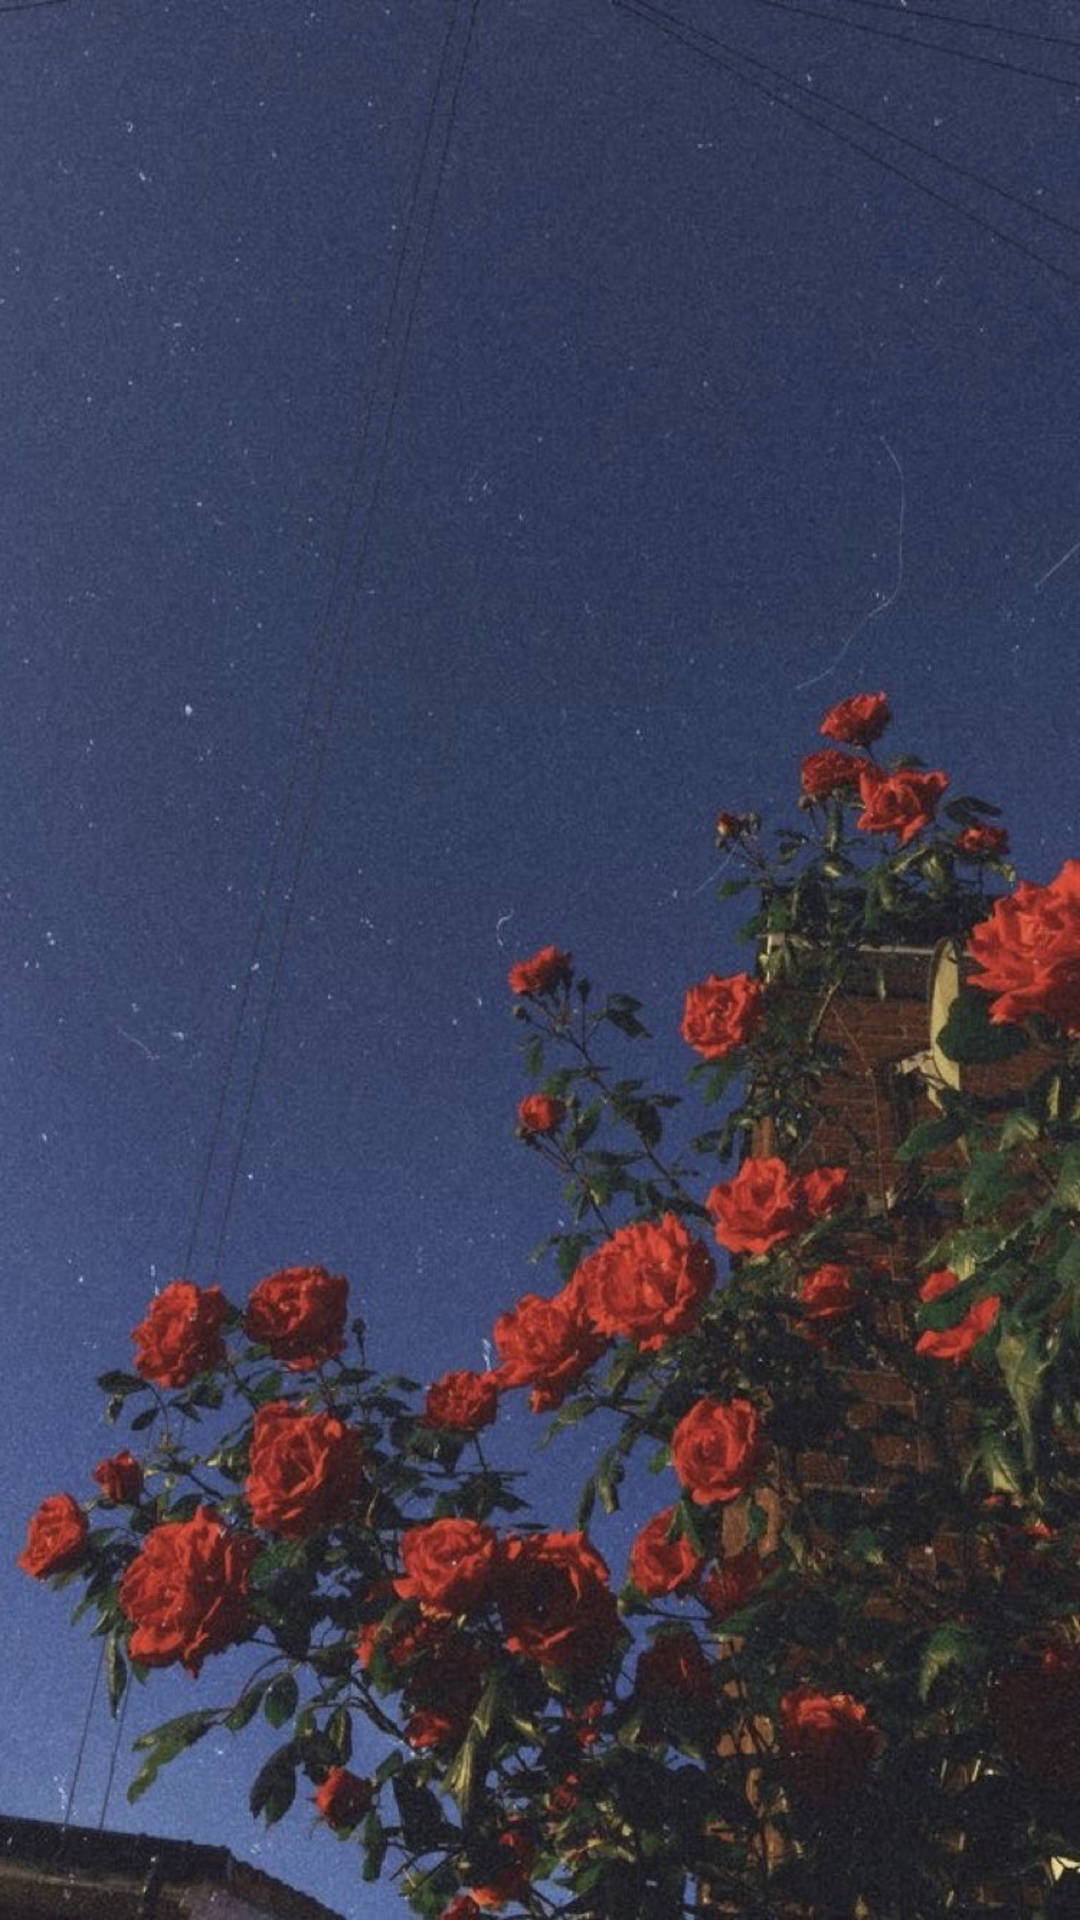 Vintage Roses With Grainy Aesthetic Indie Phone Background